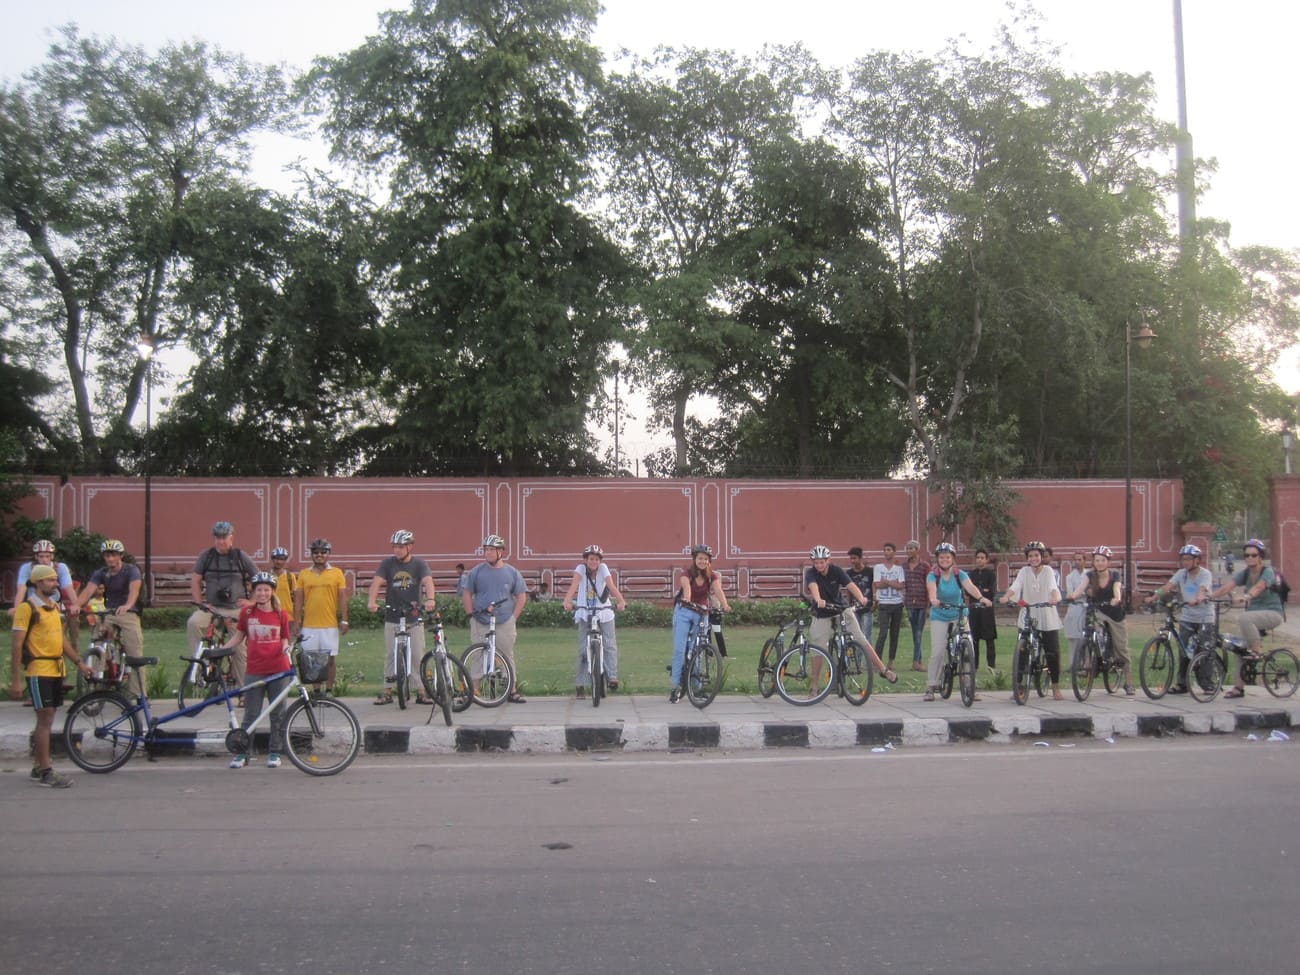 Guests gather for an introduction in the early morning before they start their cycle trip through the city of Jaipur